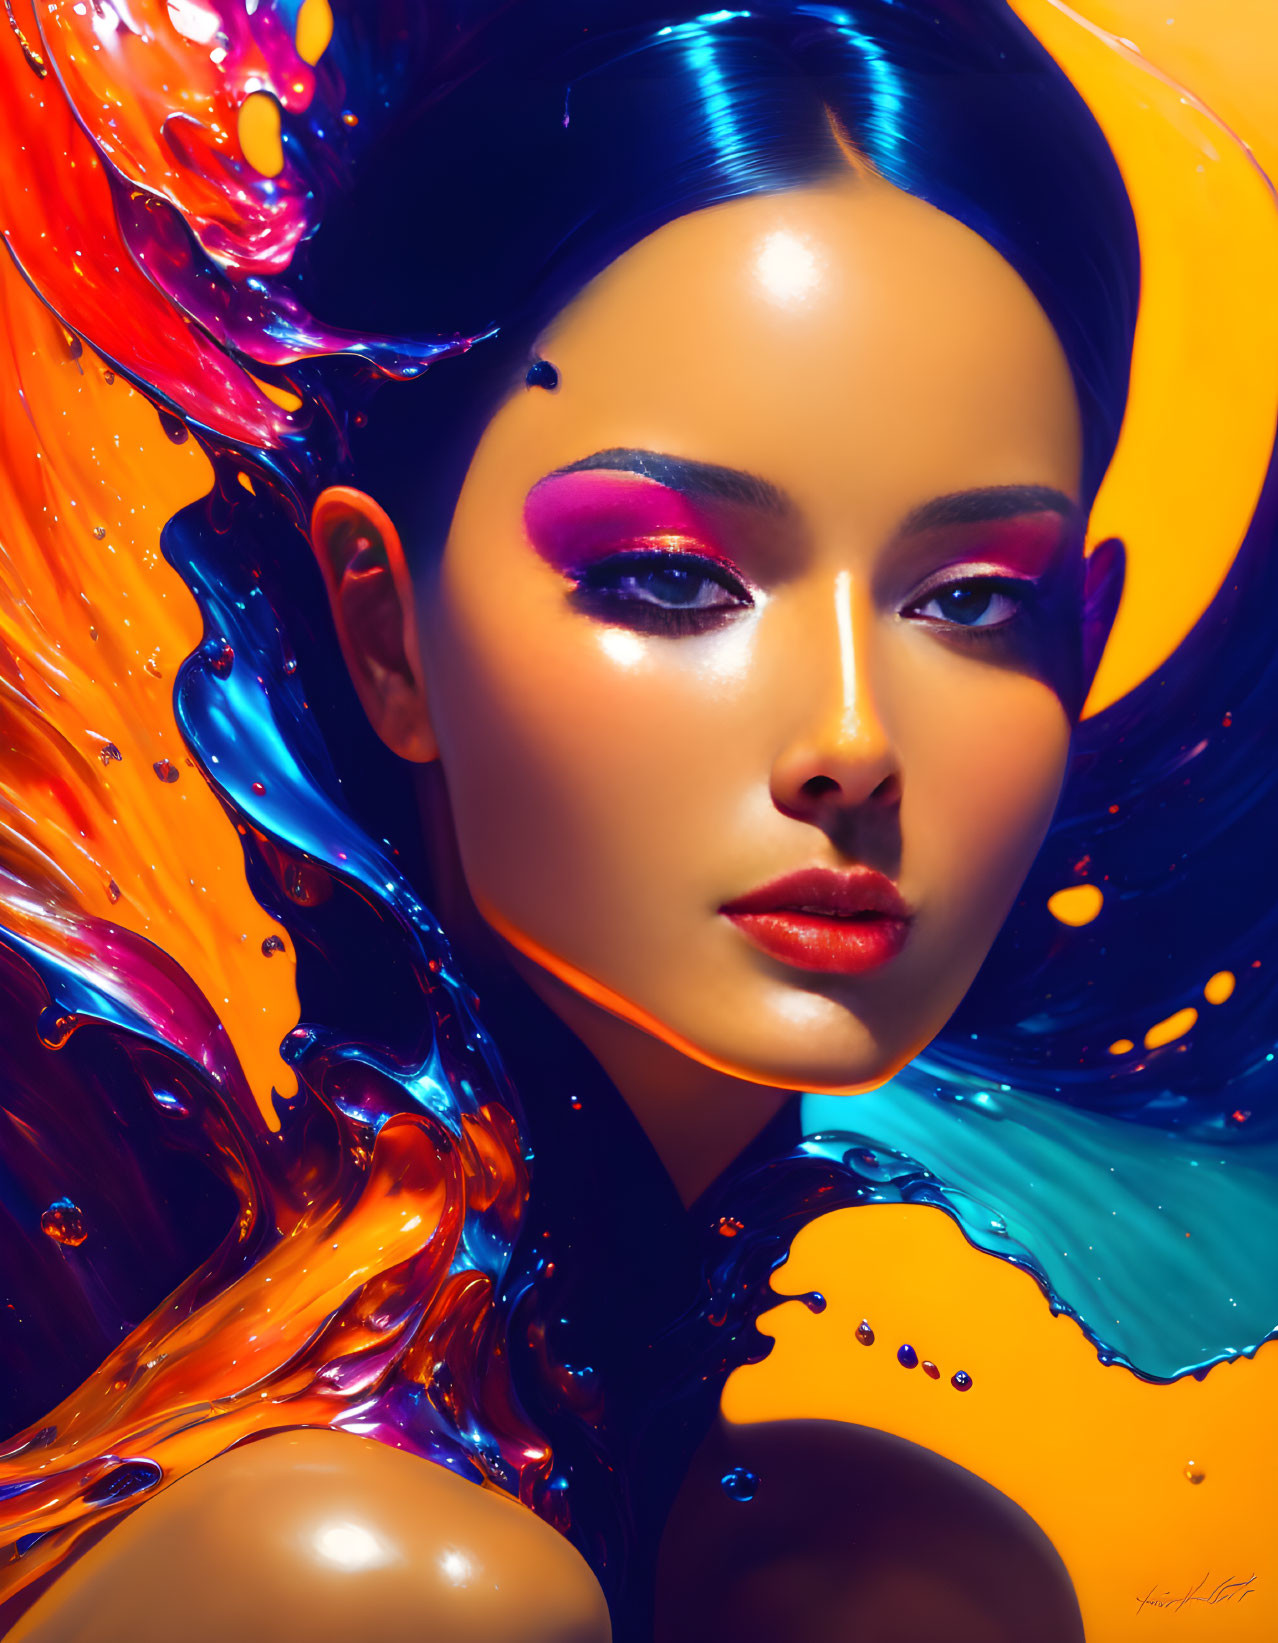 Colorful digital artwork: Woman with vibrant makeup and liquid flow.